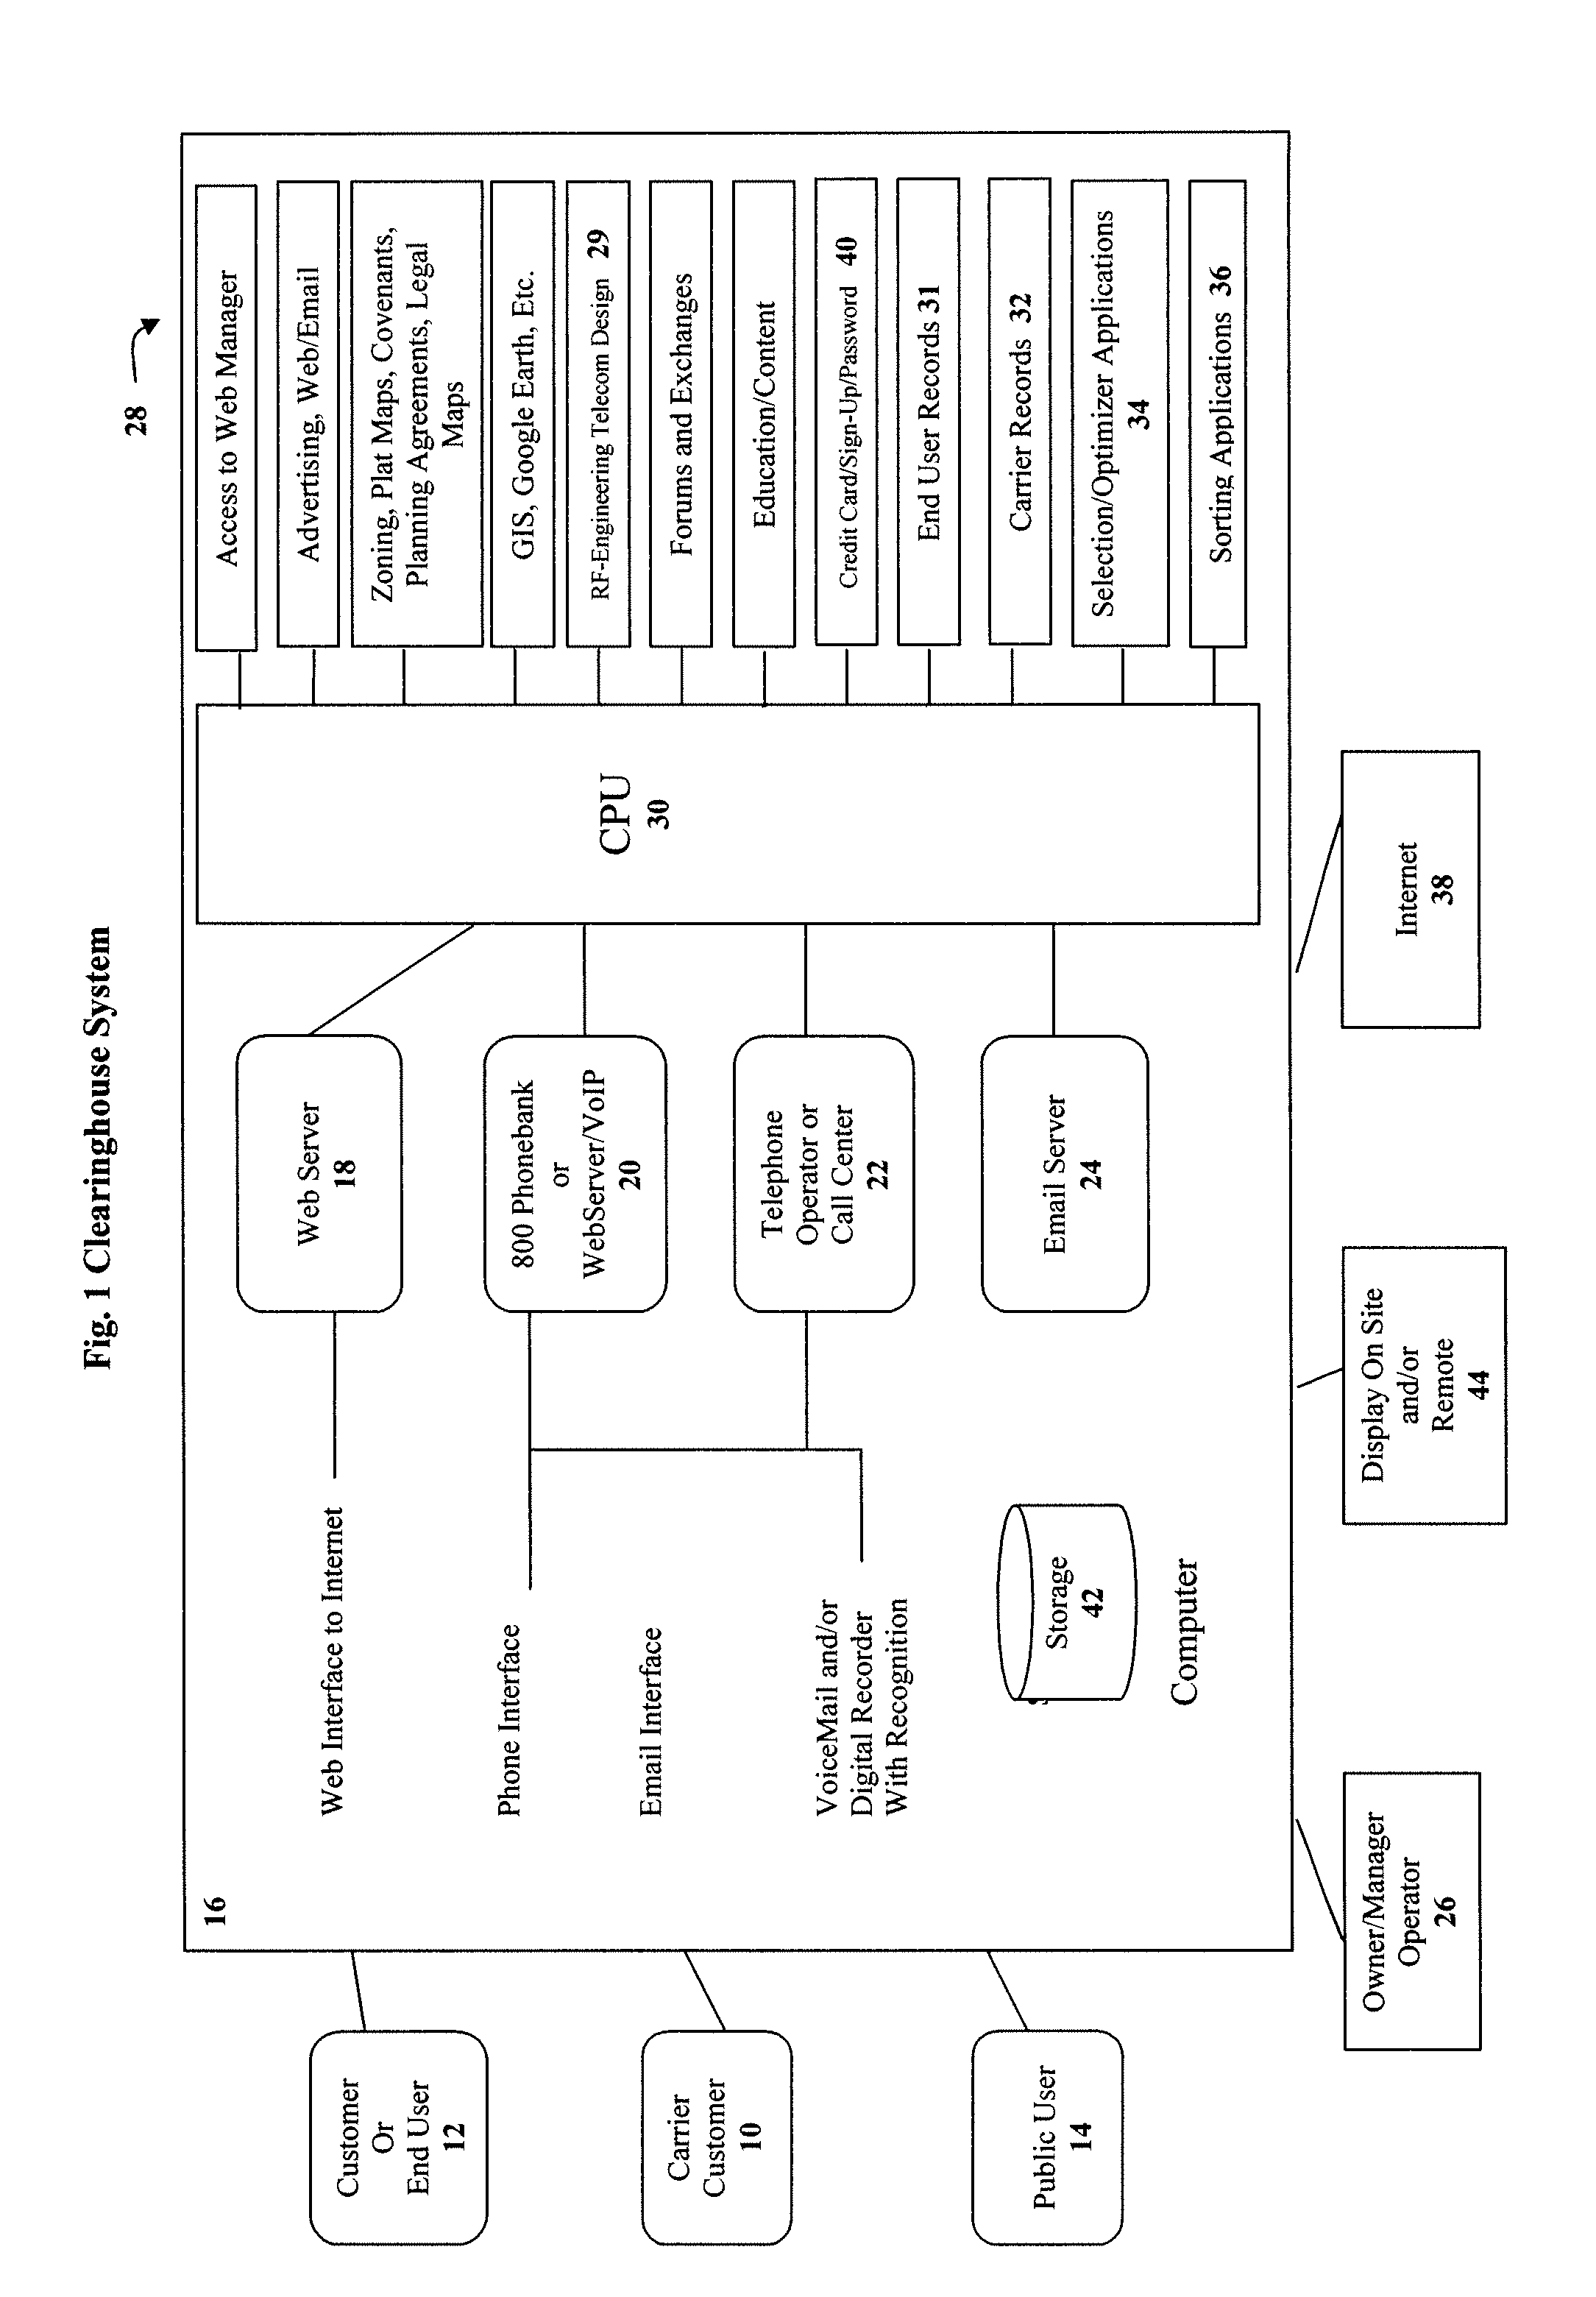 Clearinghouse system, method, and process for inventorying and acquiring infrastructure, monitoring and controlling network performance for enhancement, and providing localized content in communication networks